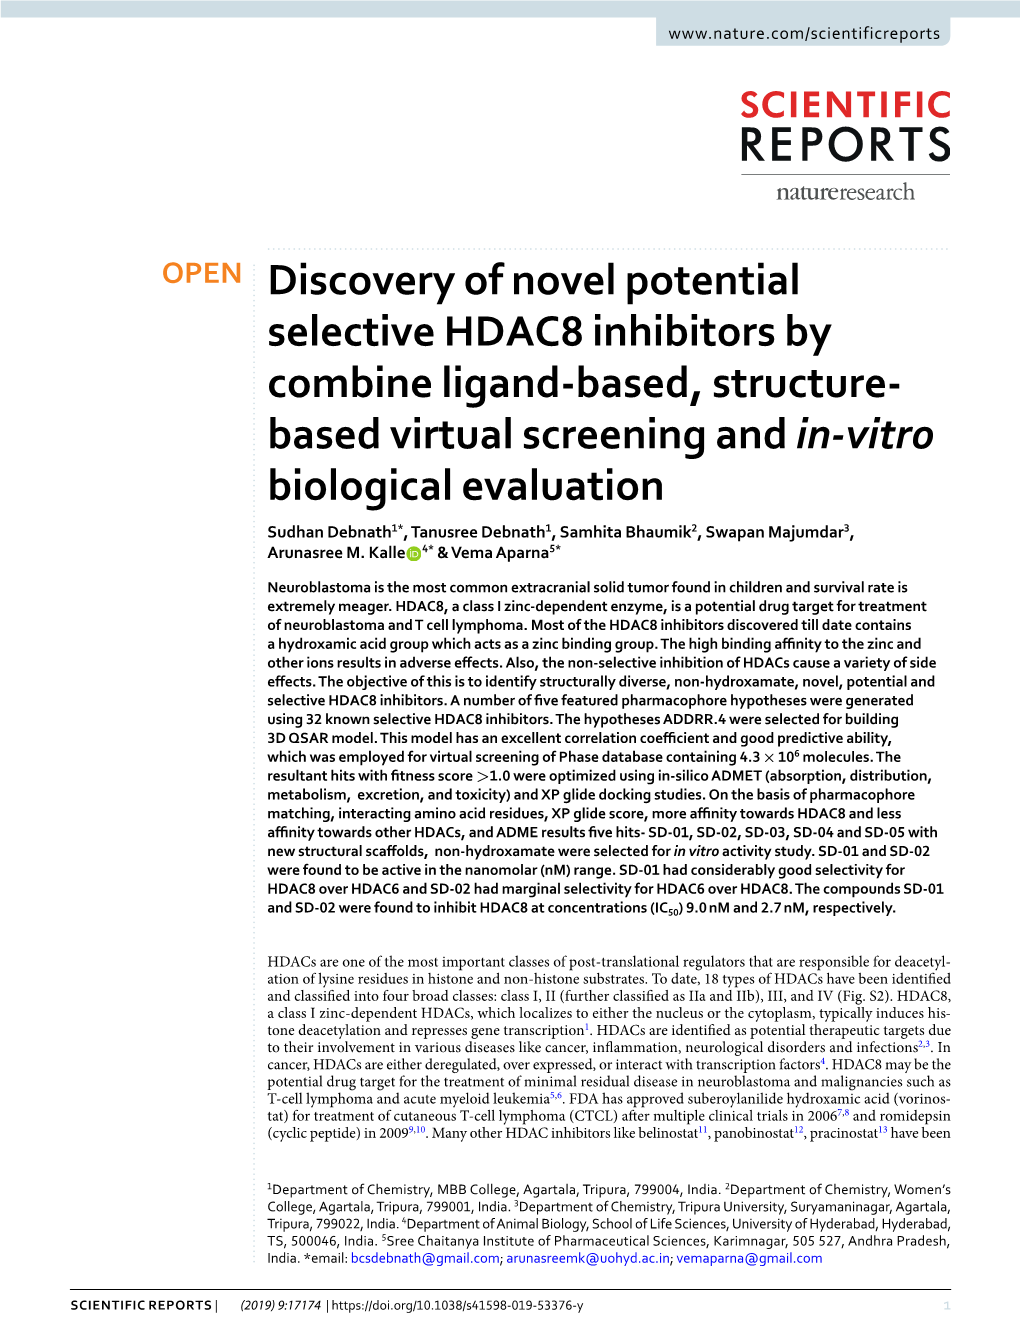 Discovery of Novel Potential Selective HDAC8 Inhibitors by Combine